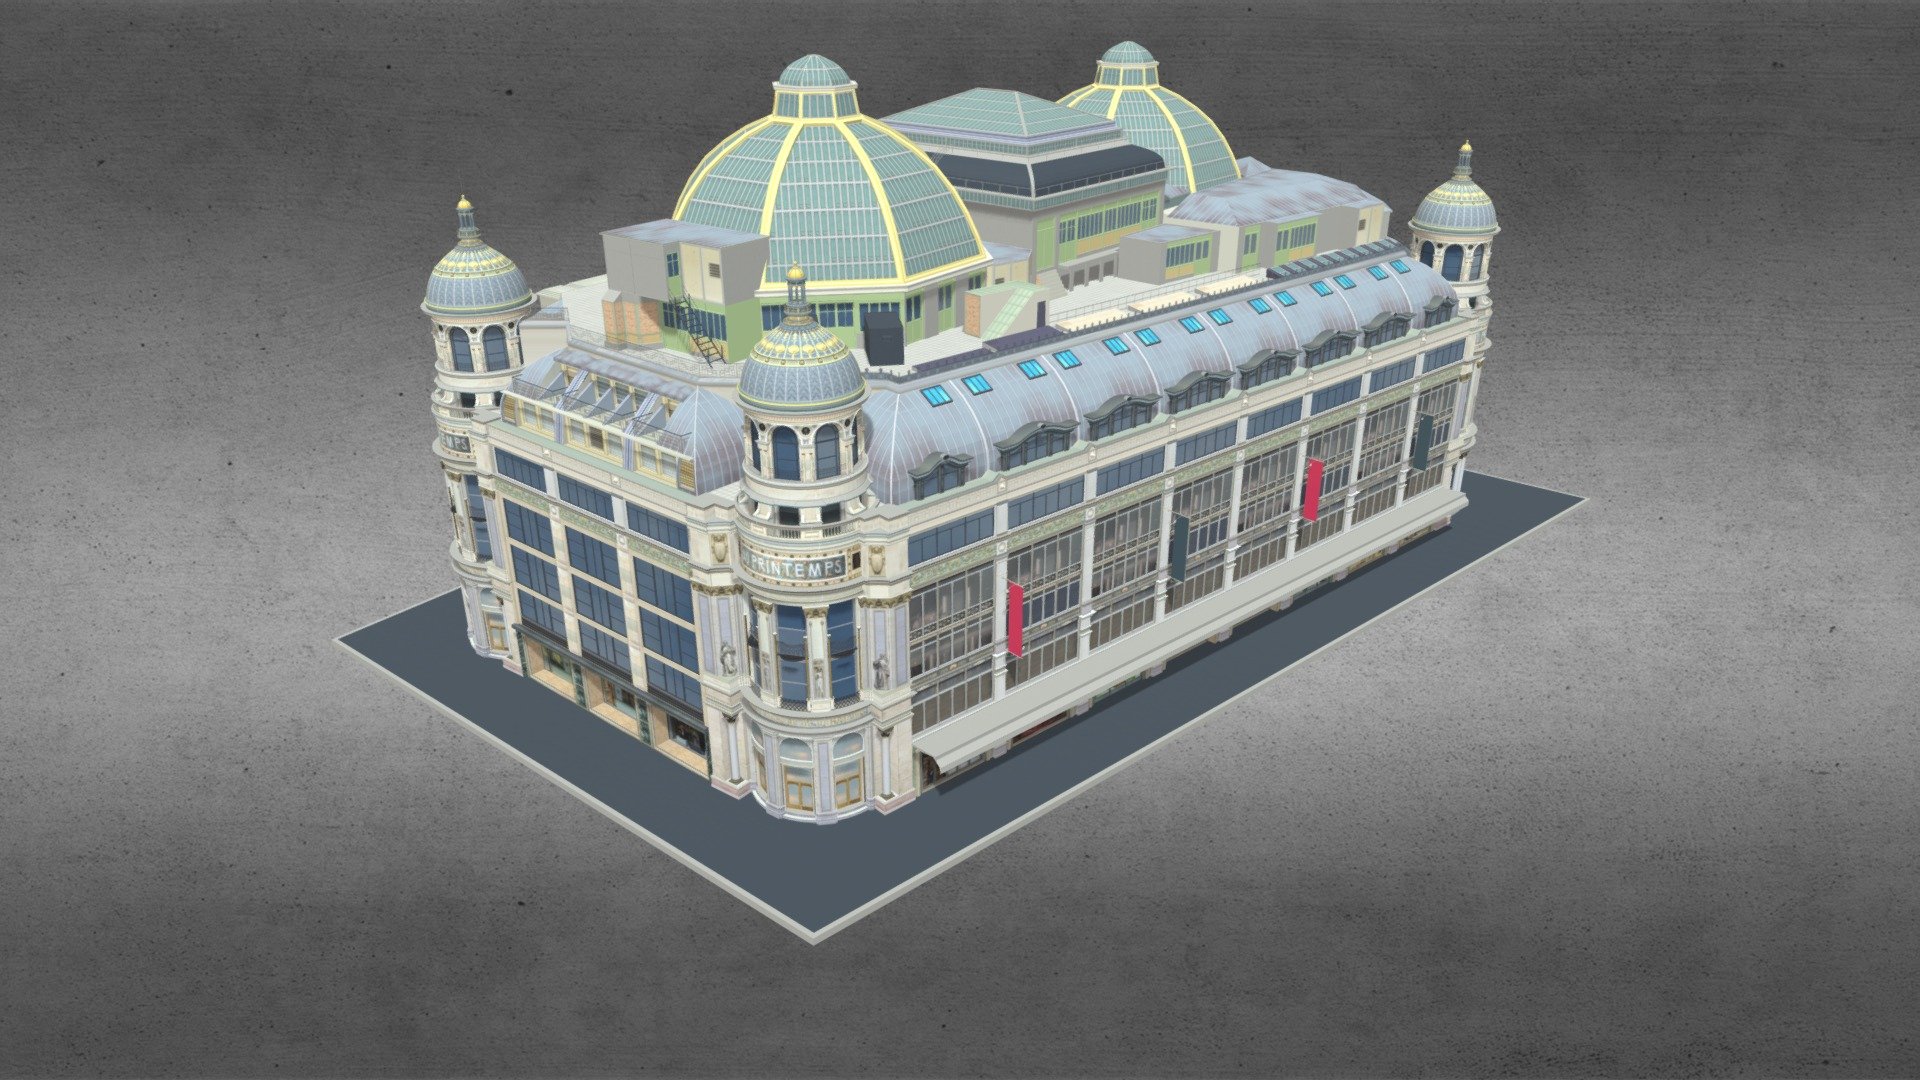 Grands Magasins Printemps Boulevard Haussmann Paris 02
Originally created with 3ds Max 2022 and rendered in V-Ray 5.0.

Total Poly Counts:
Poly Count = 199577
Vertex Count = 239301 - Grands Magasins Printemps Boulevard Haussmann 02 - 3D model by nuralam018 3d model